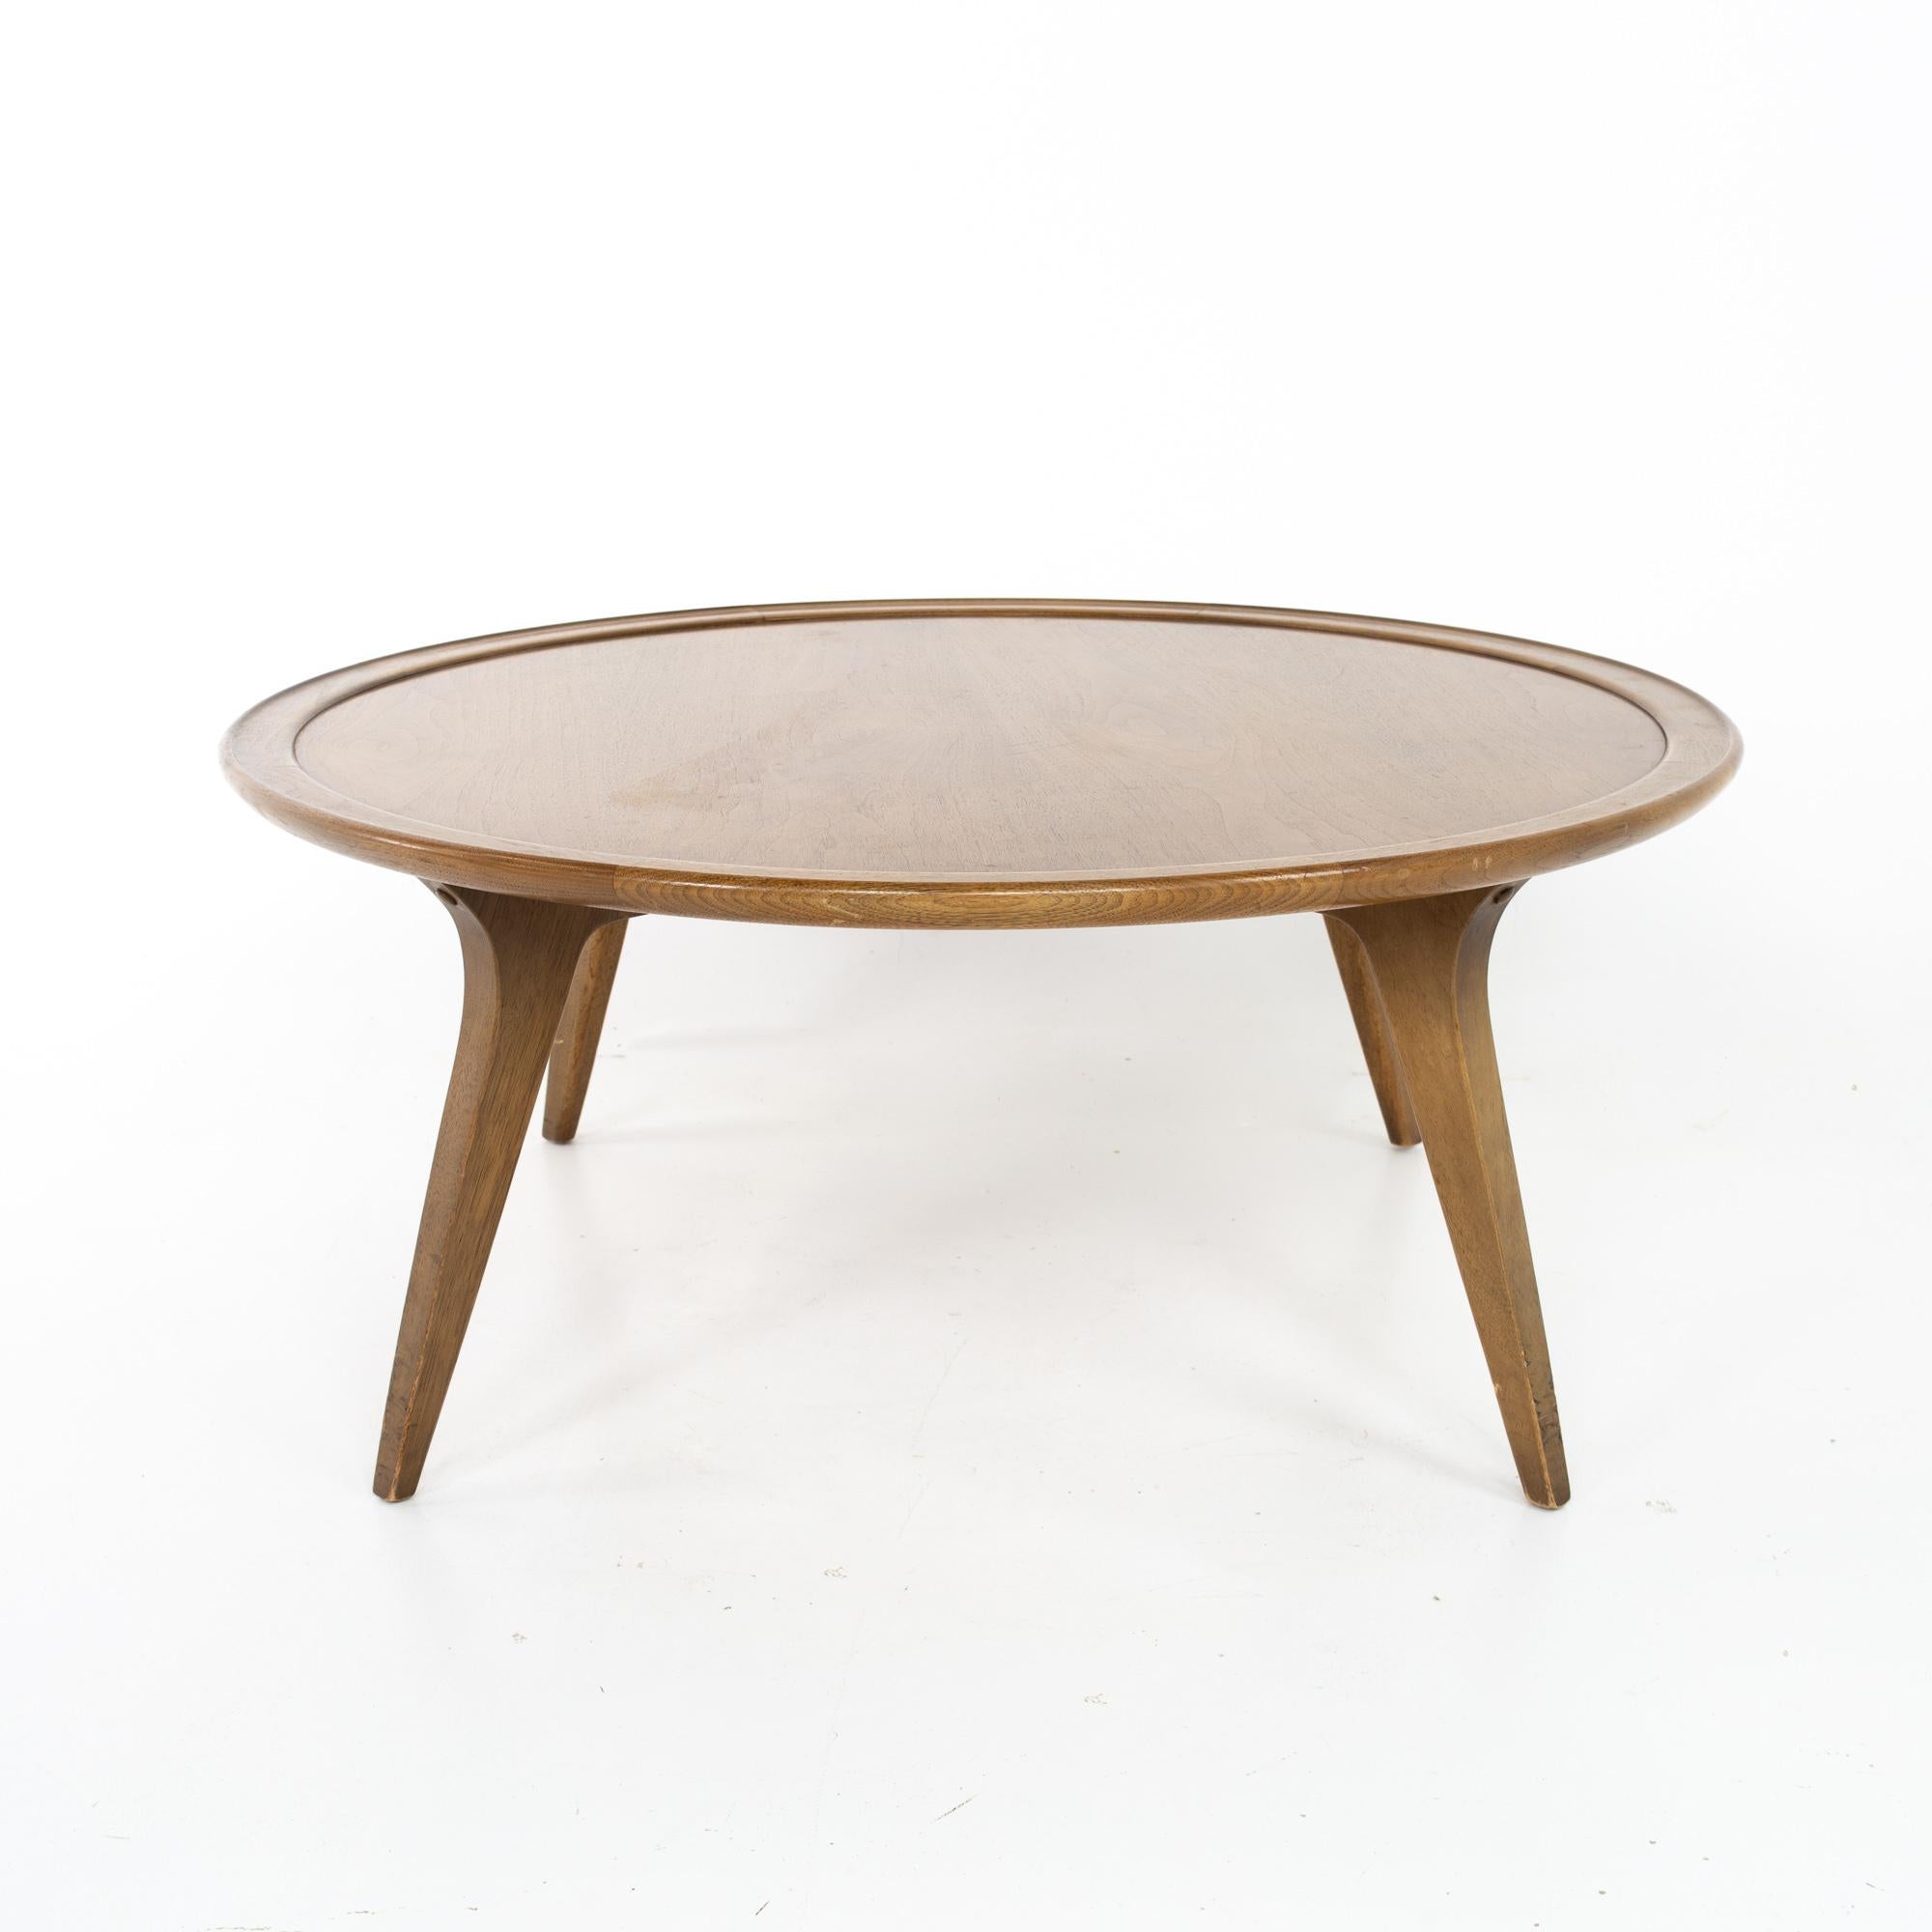 John Van Koert for Drexel Mid Century round coffee table.
Table measures: 38 wide x 38 deep x 16.5 inches high

Each piece of furniture is available in what we call restored vintage condition. Upon purchase it is thoroughly cleaned and minor repairs